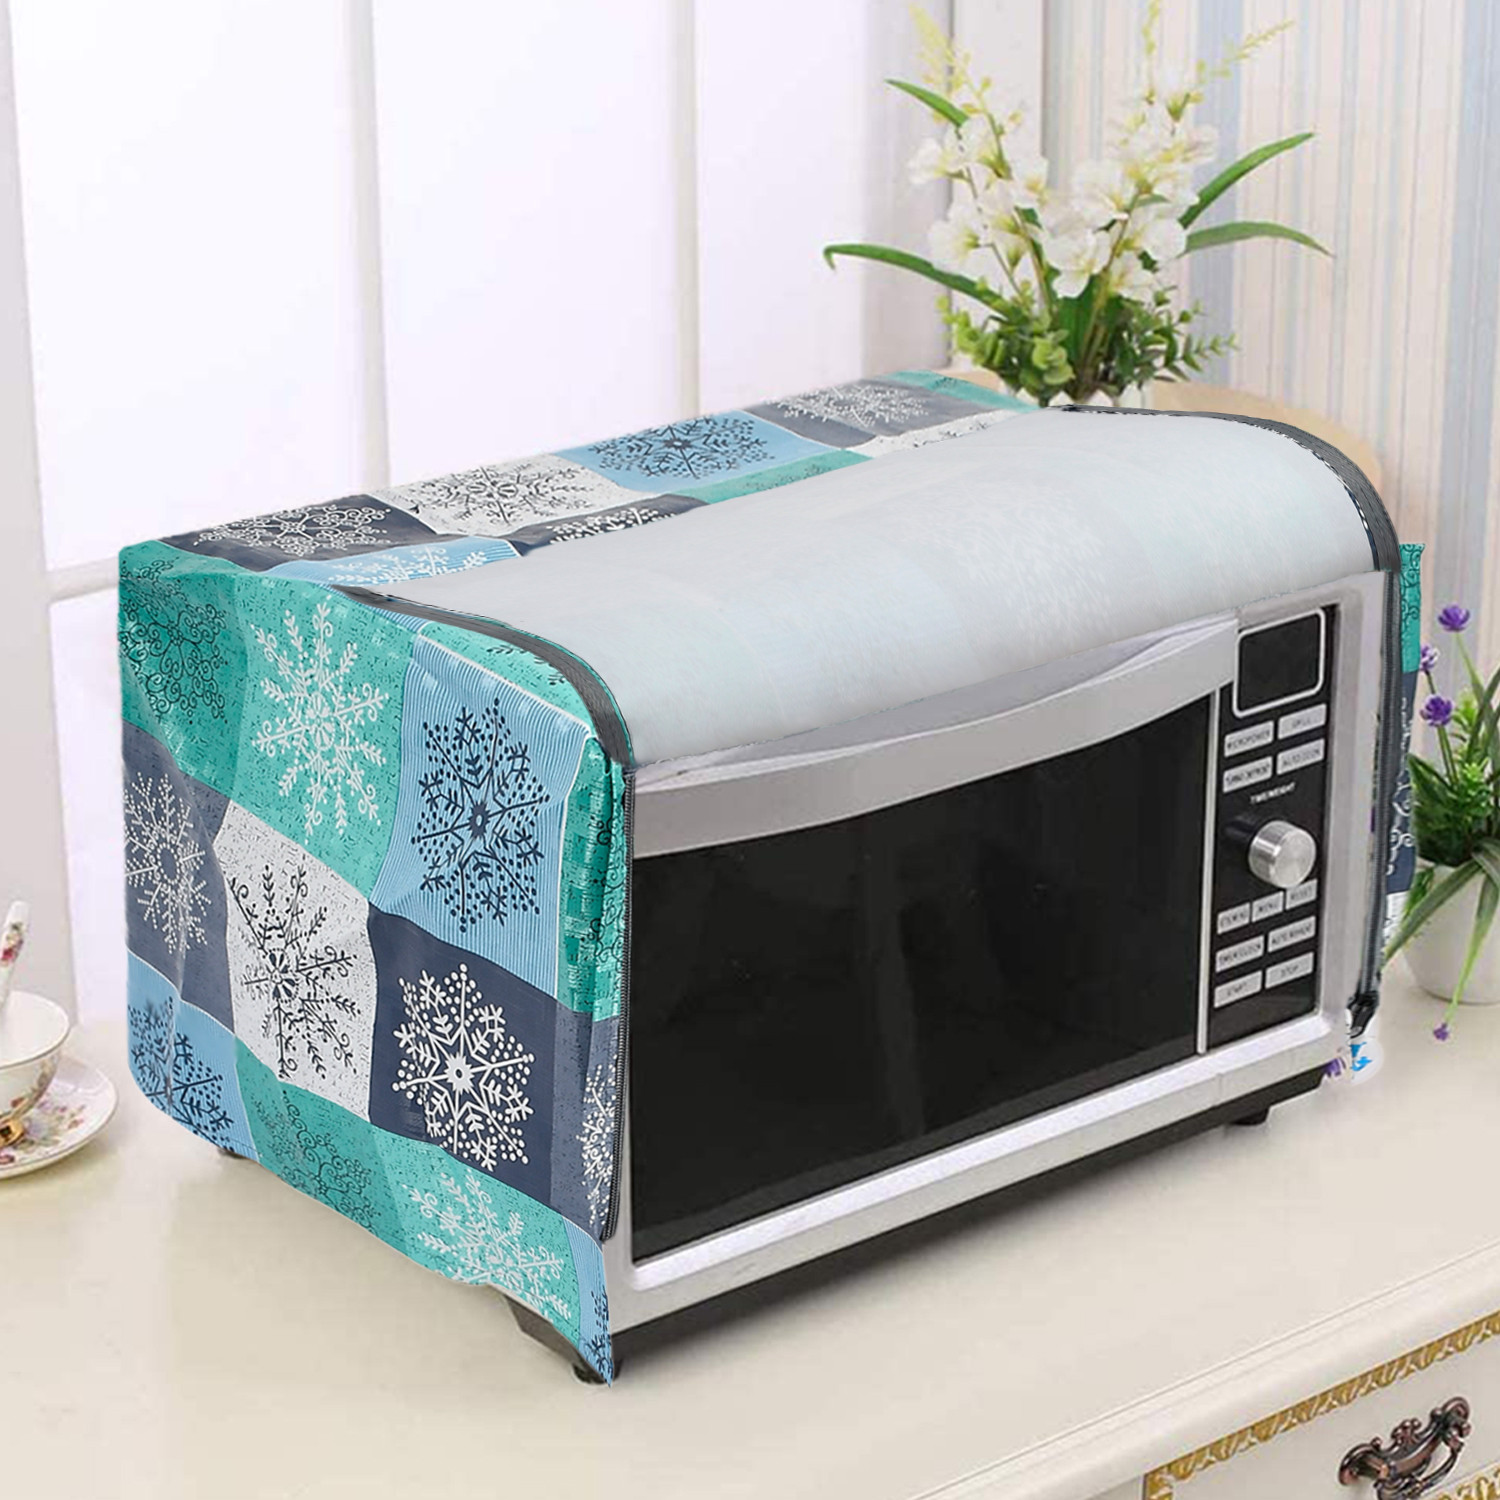 Kuber Industries PVC Check Printed Microwave Oven Cover, Dustproof Machine Protector Cover,20 Ltr. (Sky Blue)